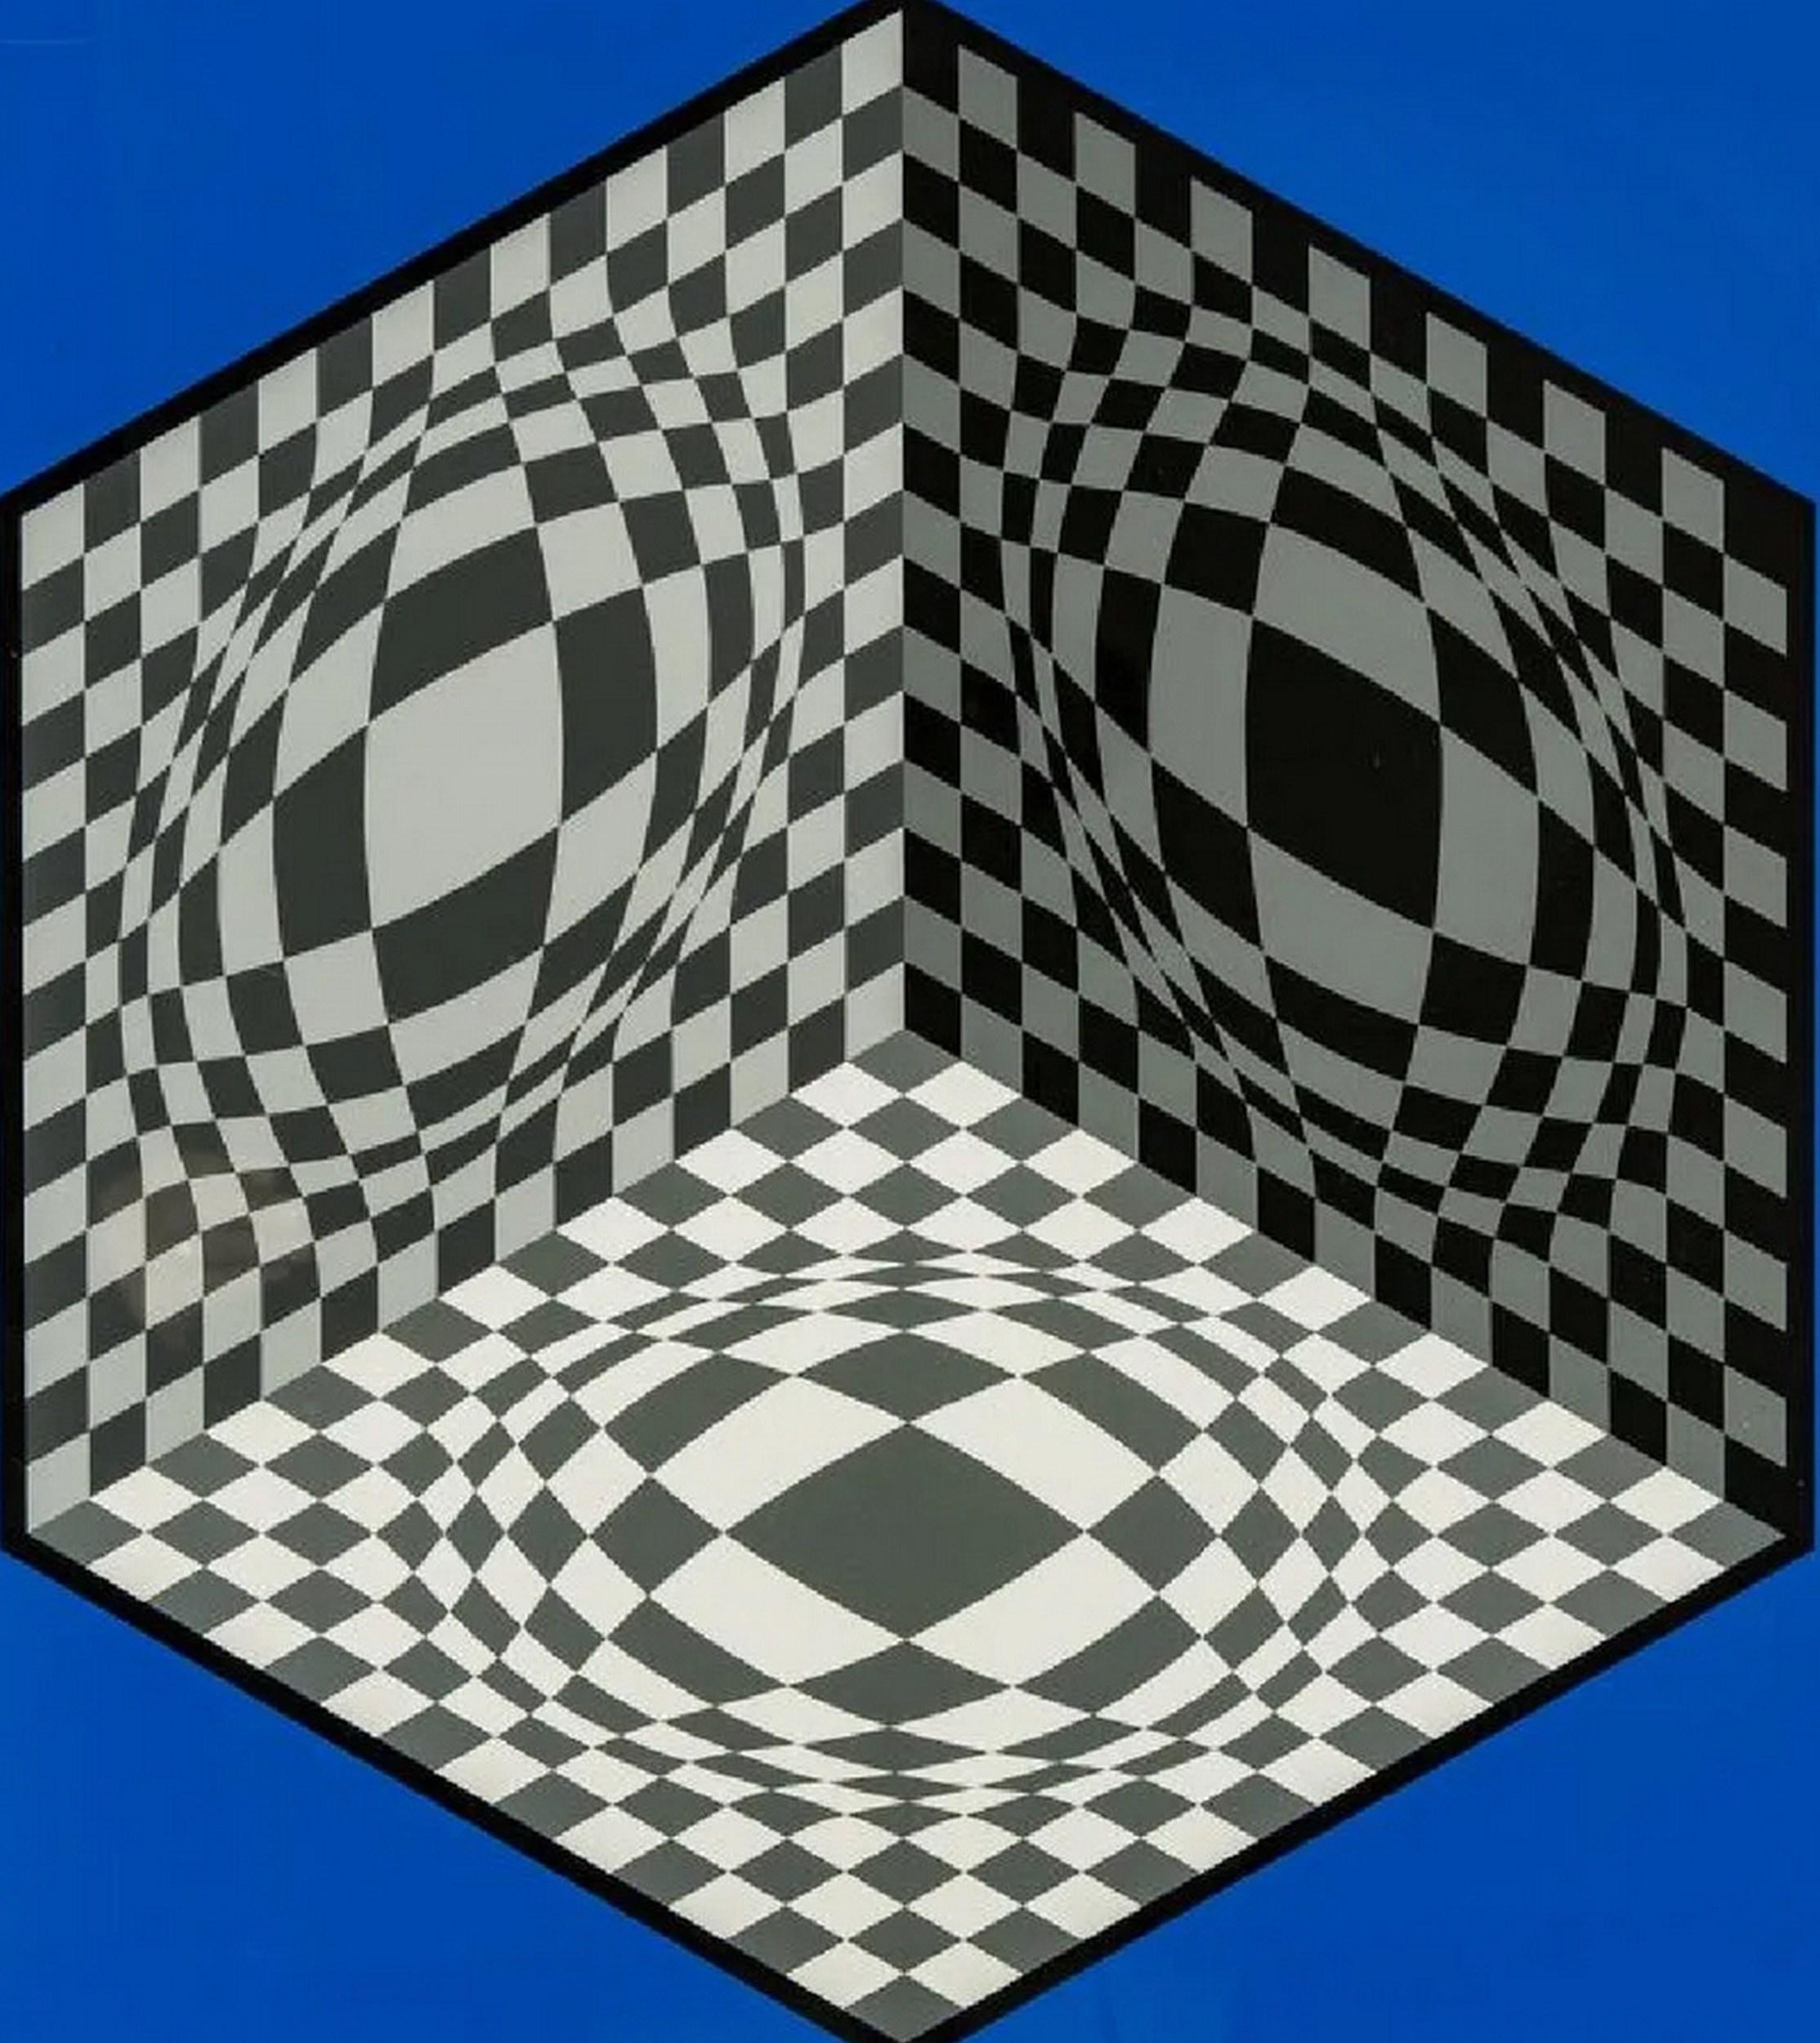 Victor Vasarely
Cubic Relationship
Medium: Serigraph on Arches Paper
Year: 1982
Edition: 325
Image Size: 21.5 H x 19.125 W inches
Visible Sheet Size: 23.5 H x 21.5 W inches
Frame Size: 34.5 H x 31.5 W inches
Signed and numbered by hand
Framed
COA